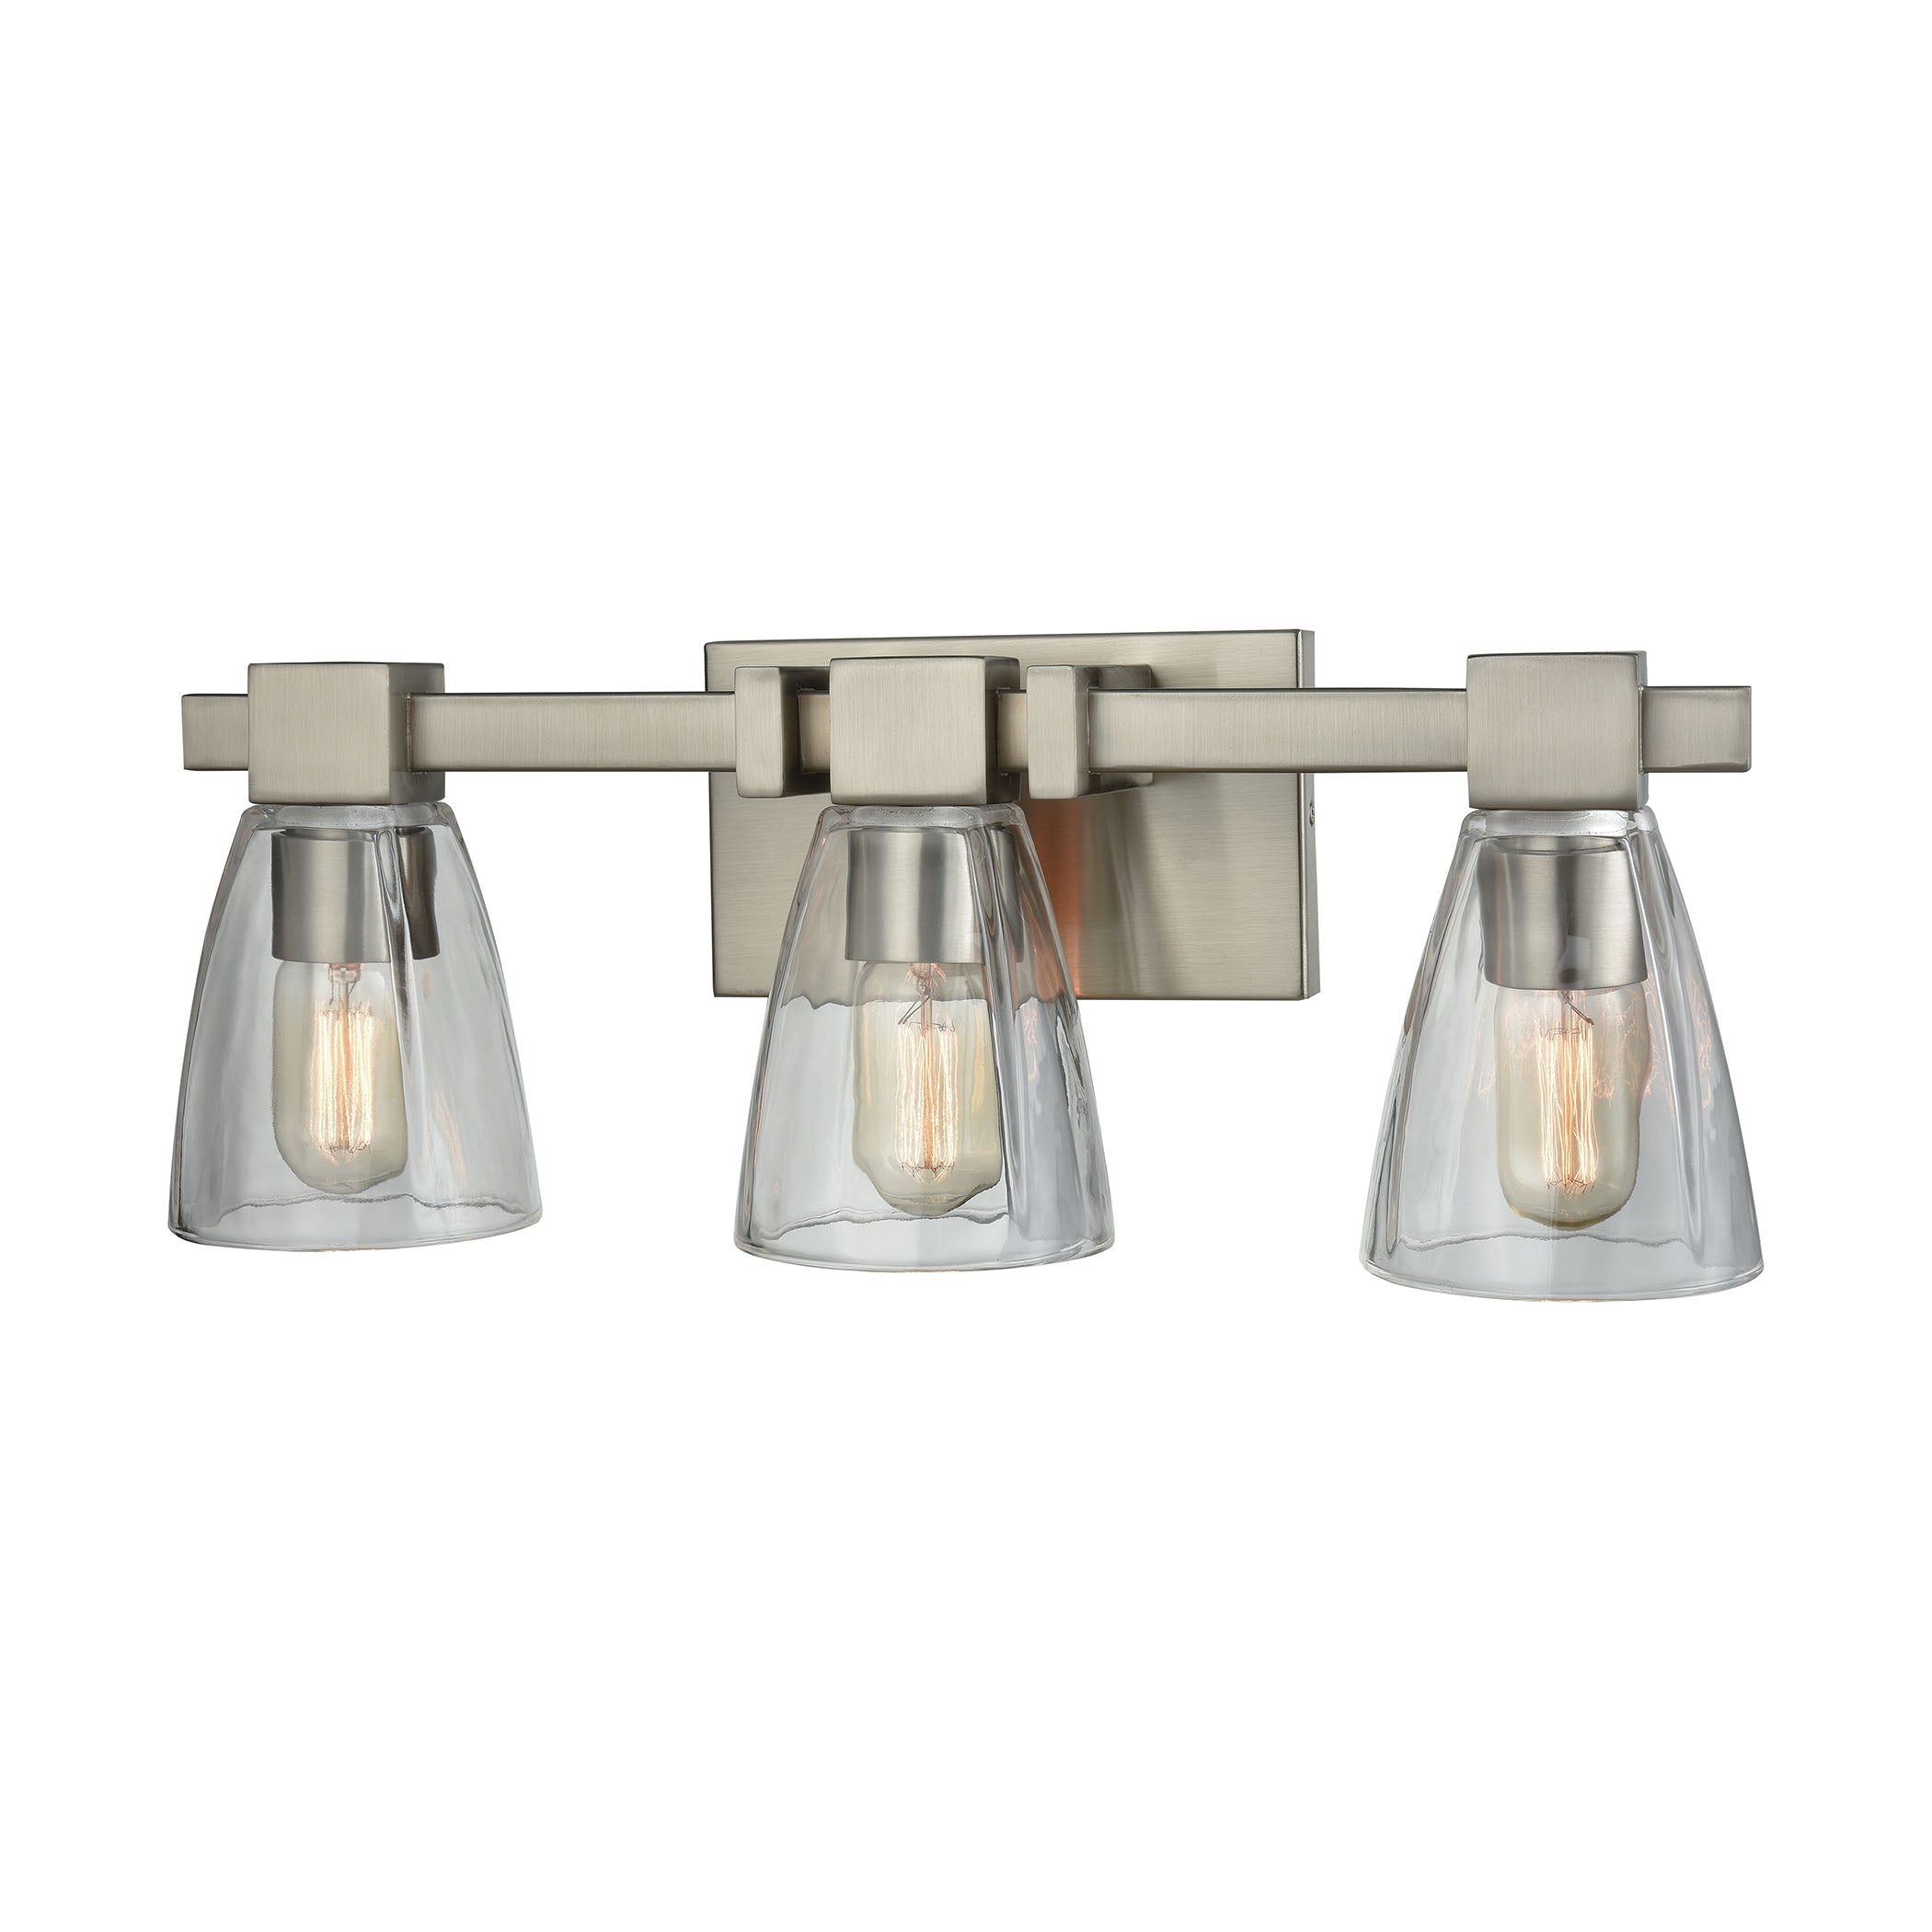 ELK Lighting 11982/3 Ensley 3-Light Vanity Lamp in Satin Nickel with Square-to-Round Clear Glass